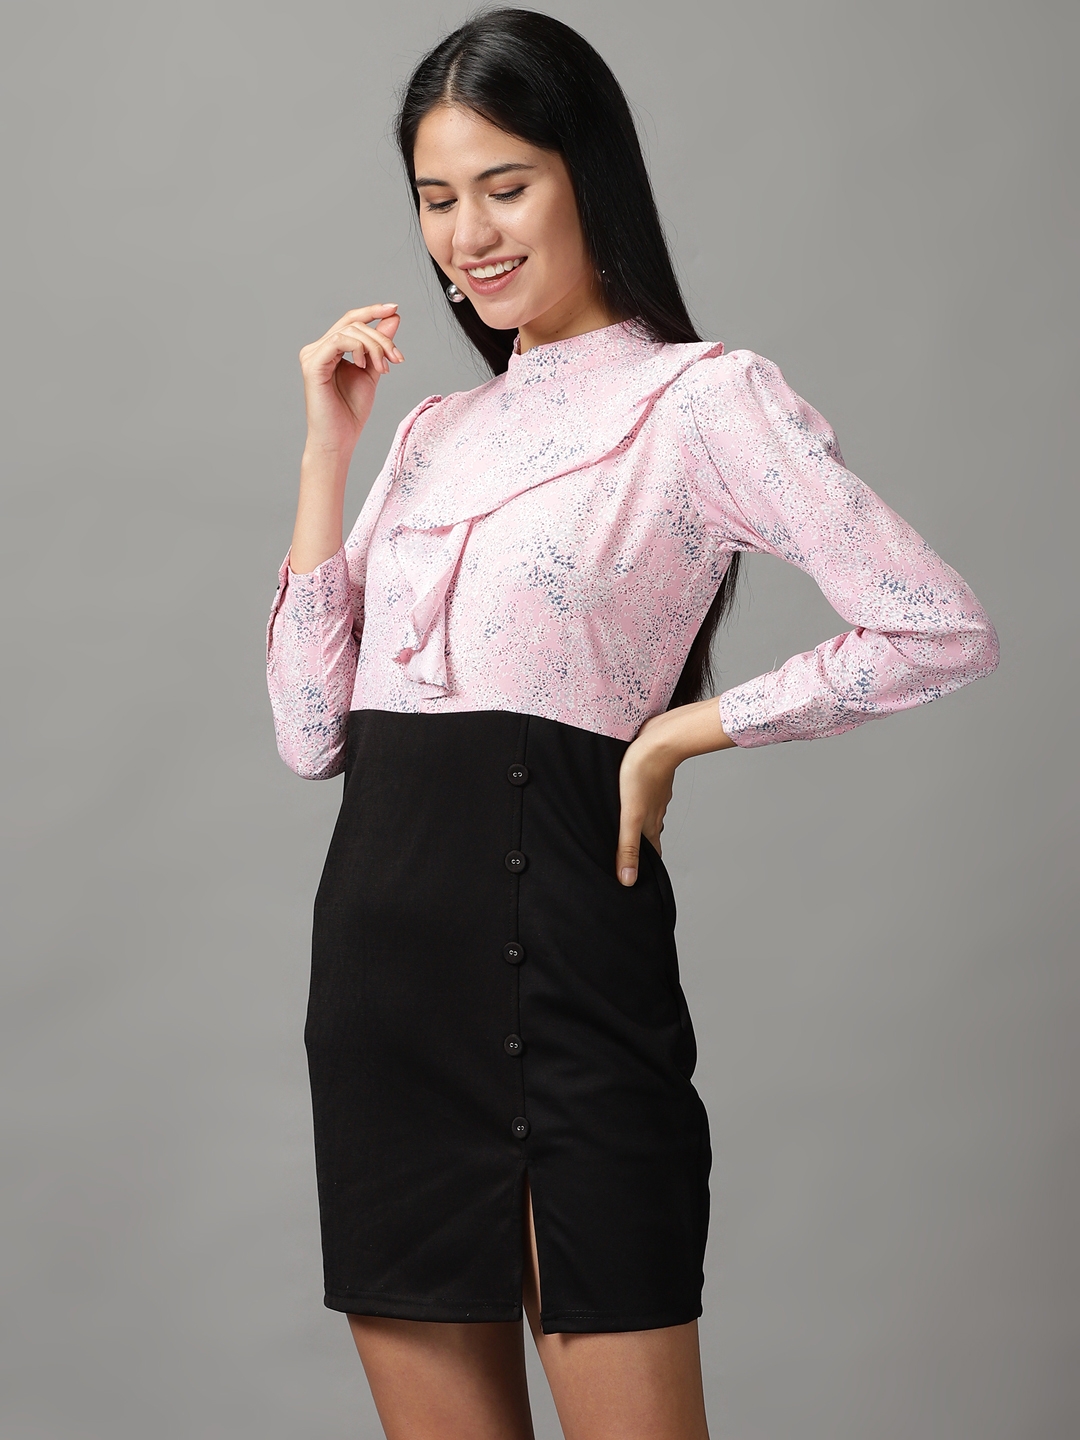 Women's Pink Polyester Printed Dresses